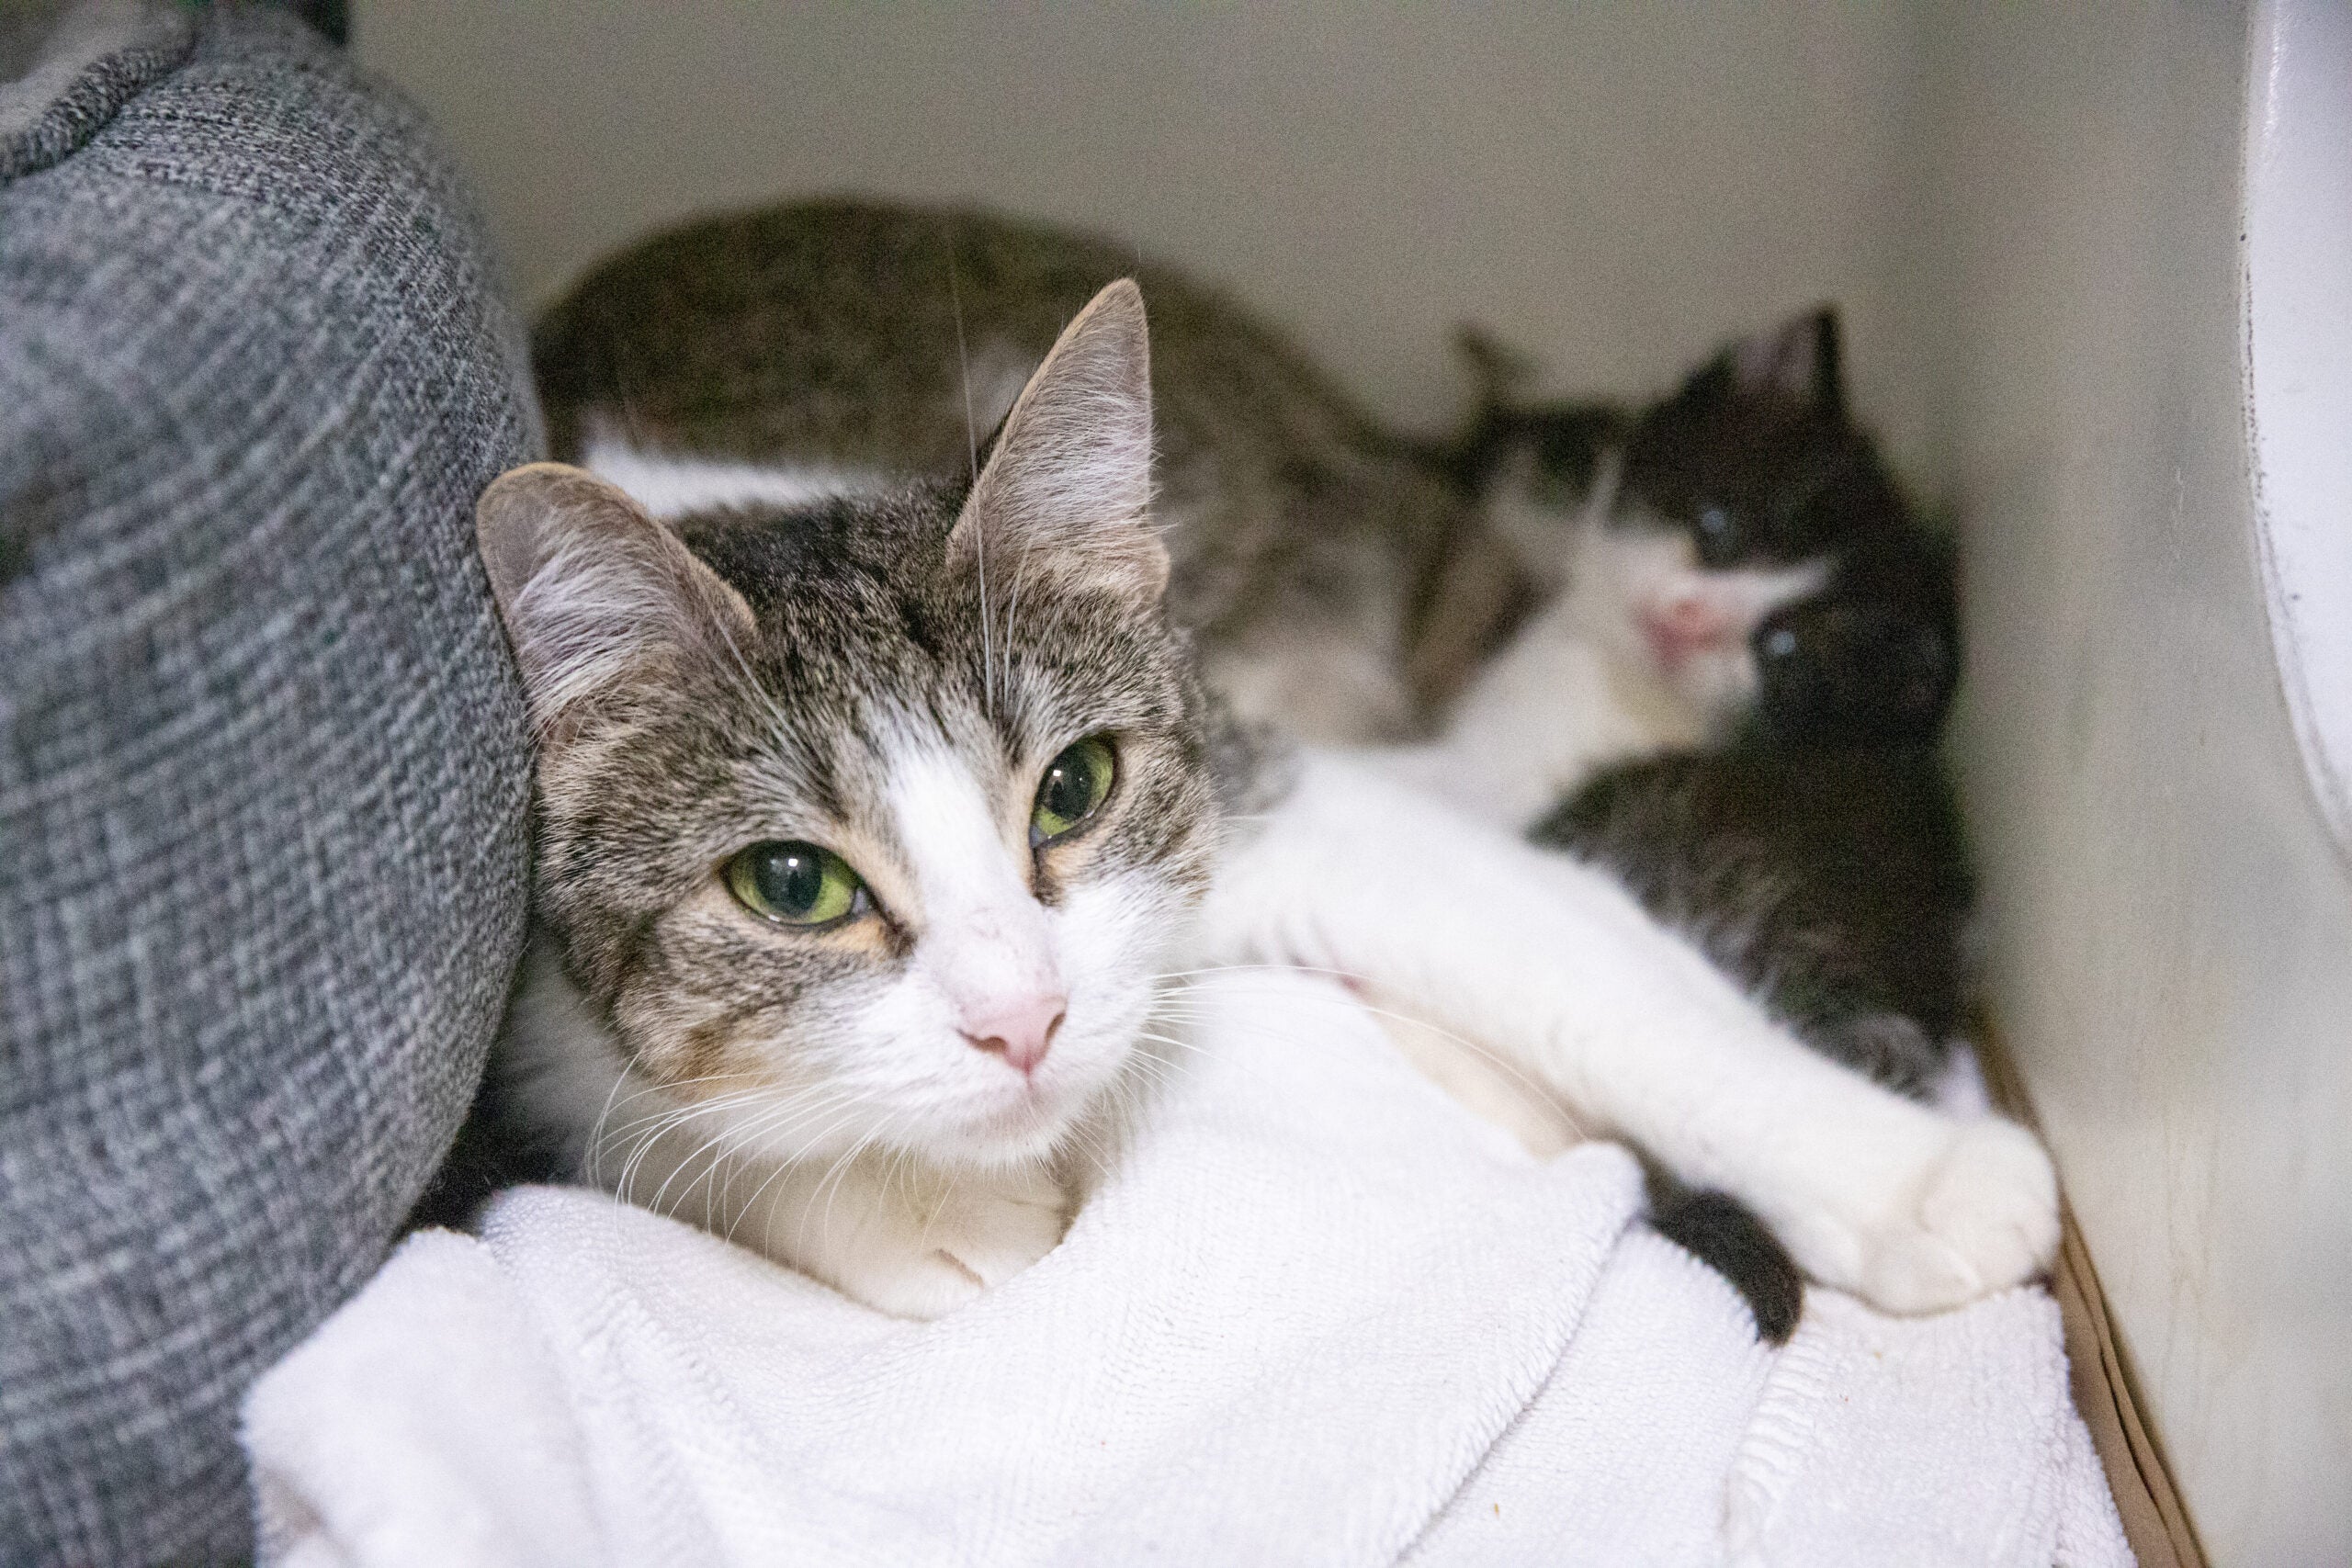 Animal Rescue League caring for more than 75 cats and kittens from 3  overcrowding situations